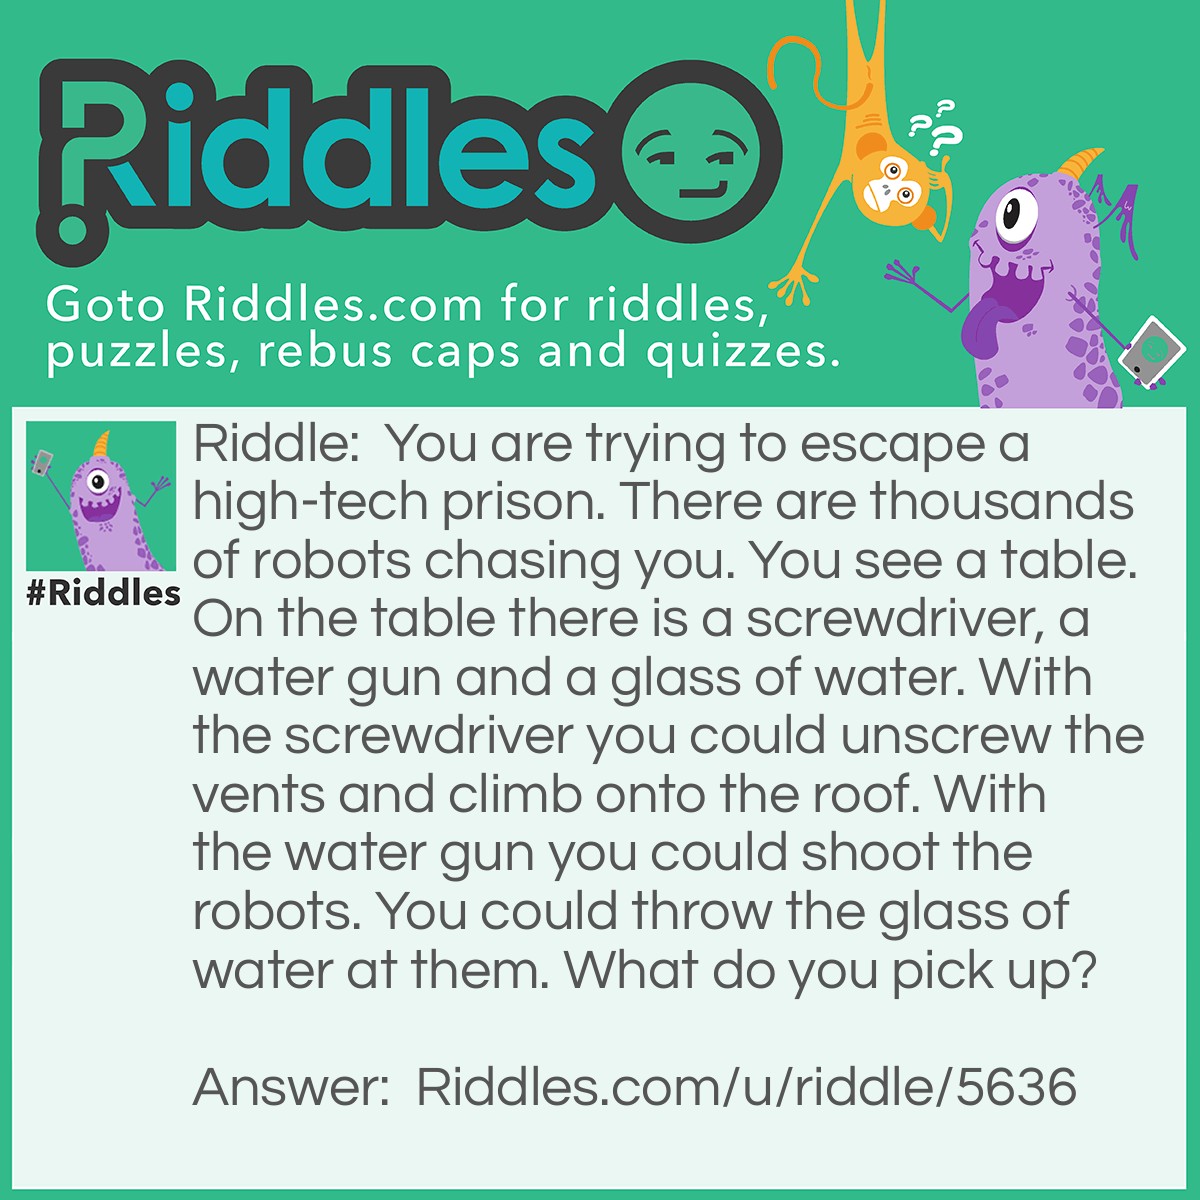 Riddle: You are trying to escape a high-tech prison. There are thousands of robots chasing you. You see a table. On the table there is a screwdriver, a water gun and a glass of water. With the screwdriver you could unscrew the vents and climb onto the roof. With the water gun you could shoot the robots. You could throw the glass of water at them. What do you pick up? Answer: The answer is the glass of water. You pick up the screwdriver and drill into the roof. You climb onto the roof and are seen by CCTV cameras. There are more robots on the roof. You pick up the water gun only to discover there is no water in it. Too bad. You pick up the glass of water and chuck it at the robots. It will give you time to run.